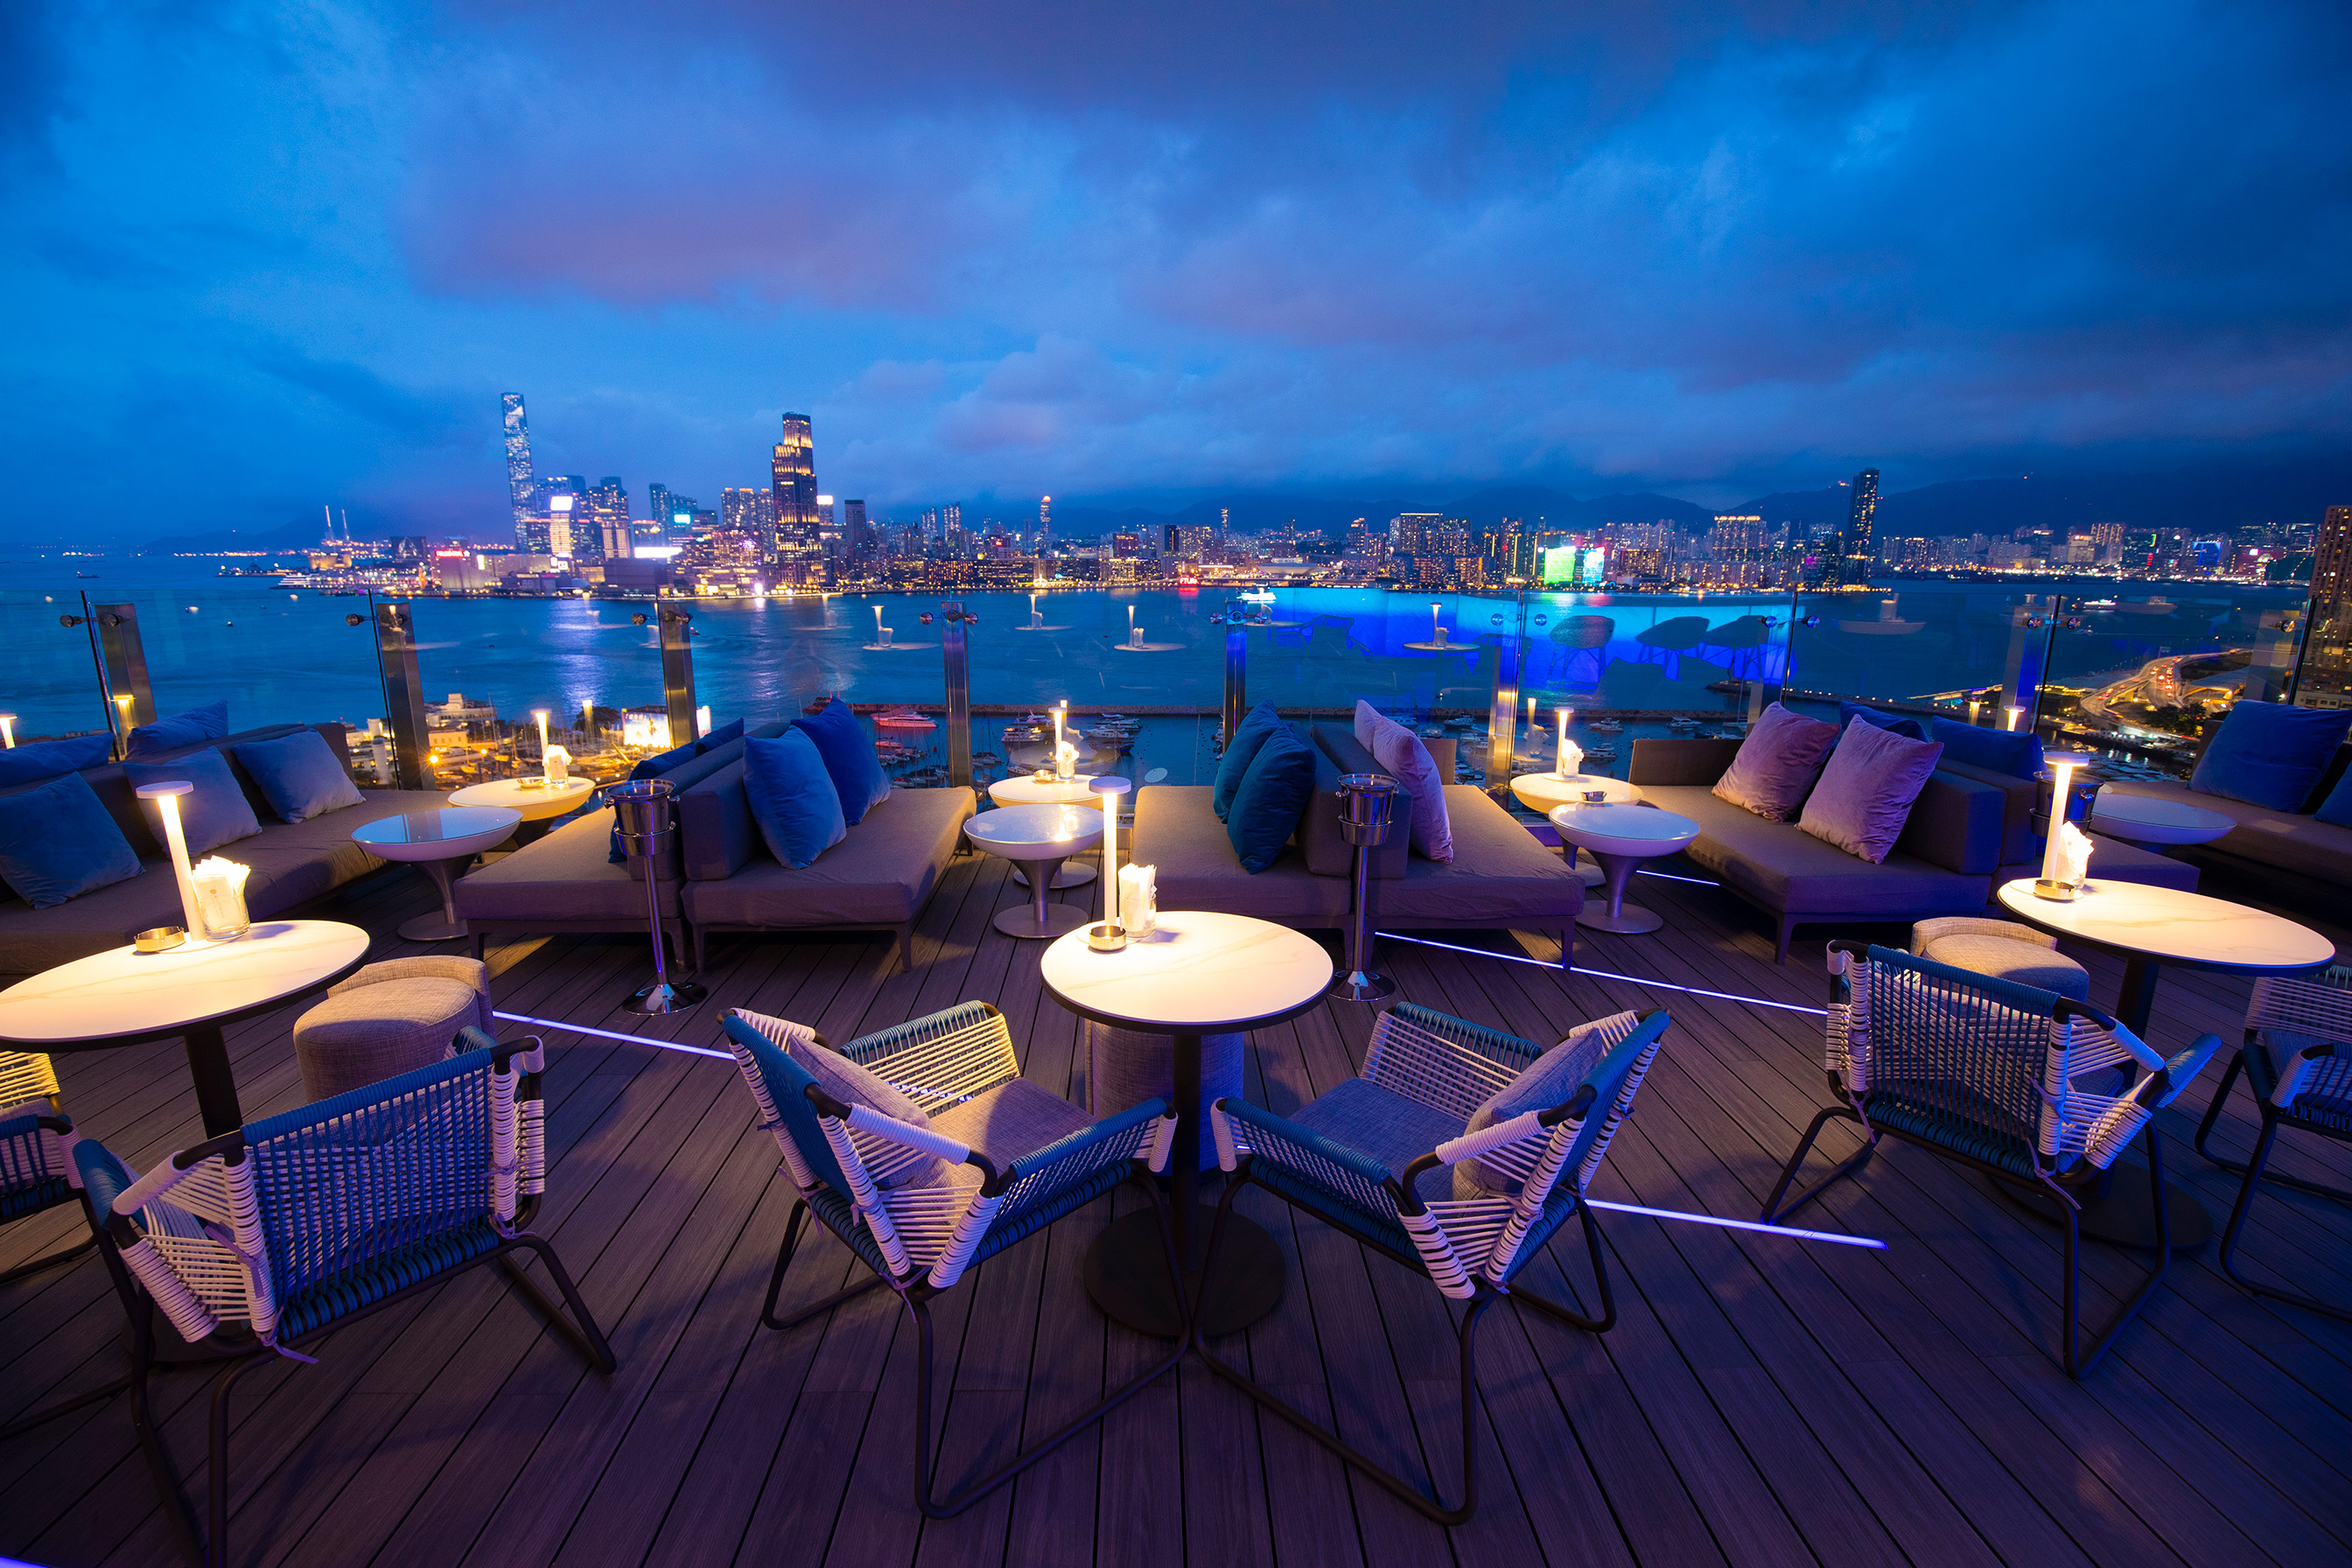 Harbour View by night of SKYE Roofbar and Dining of The Park Lane Hong Kong, a Pullman Hotel in Causeway Bay